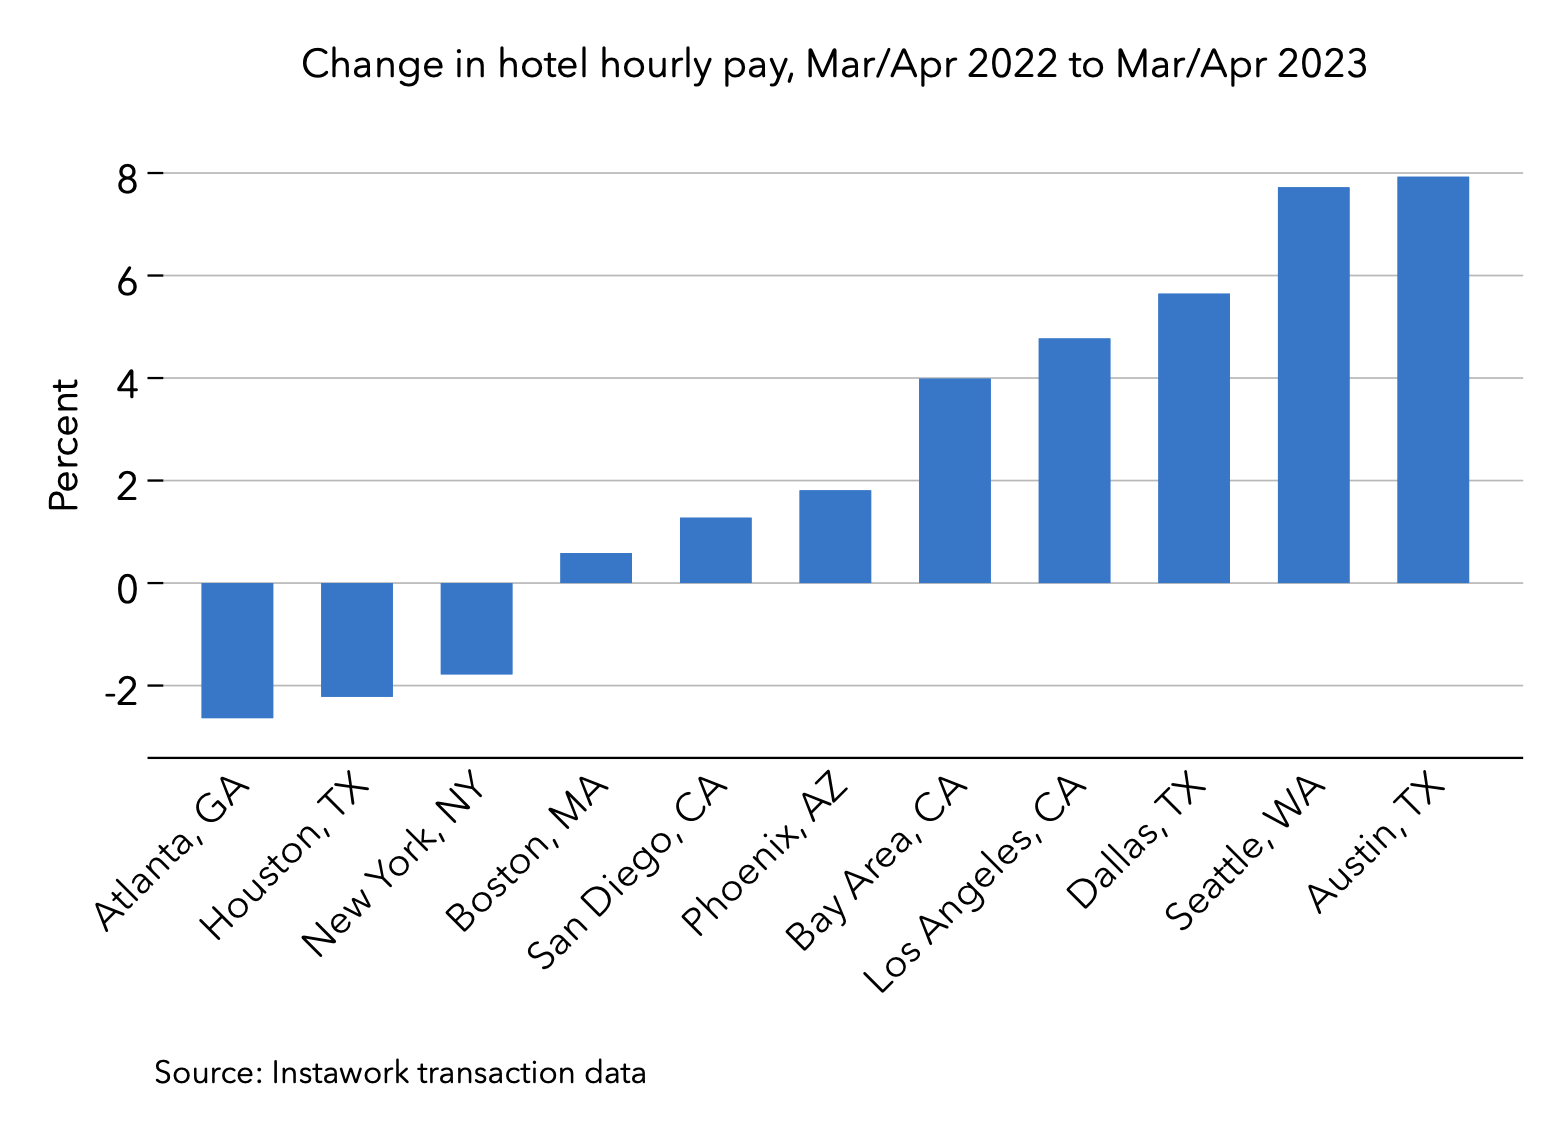 17 May 2023 hotel pay by region